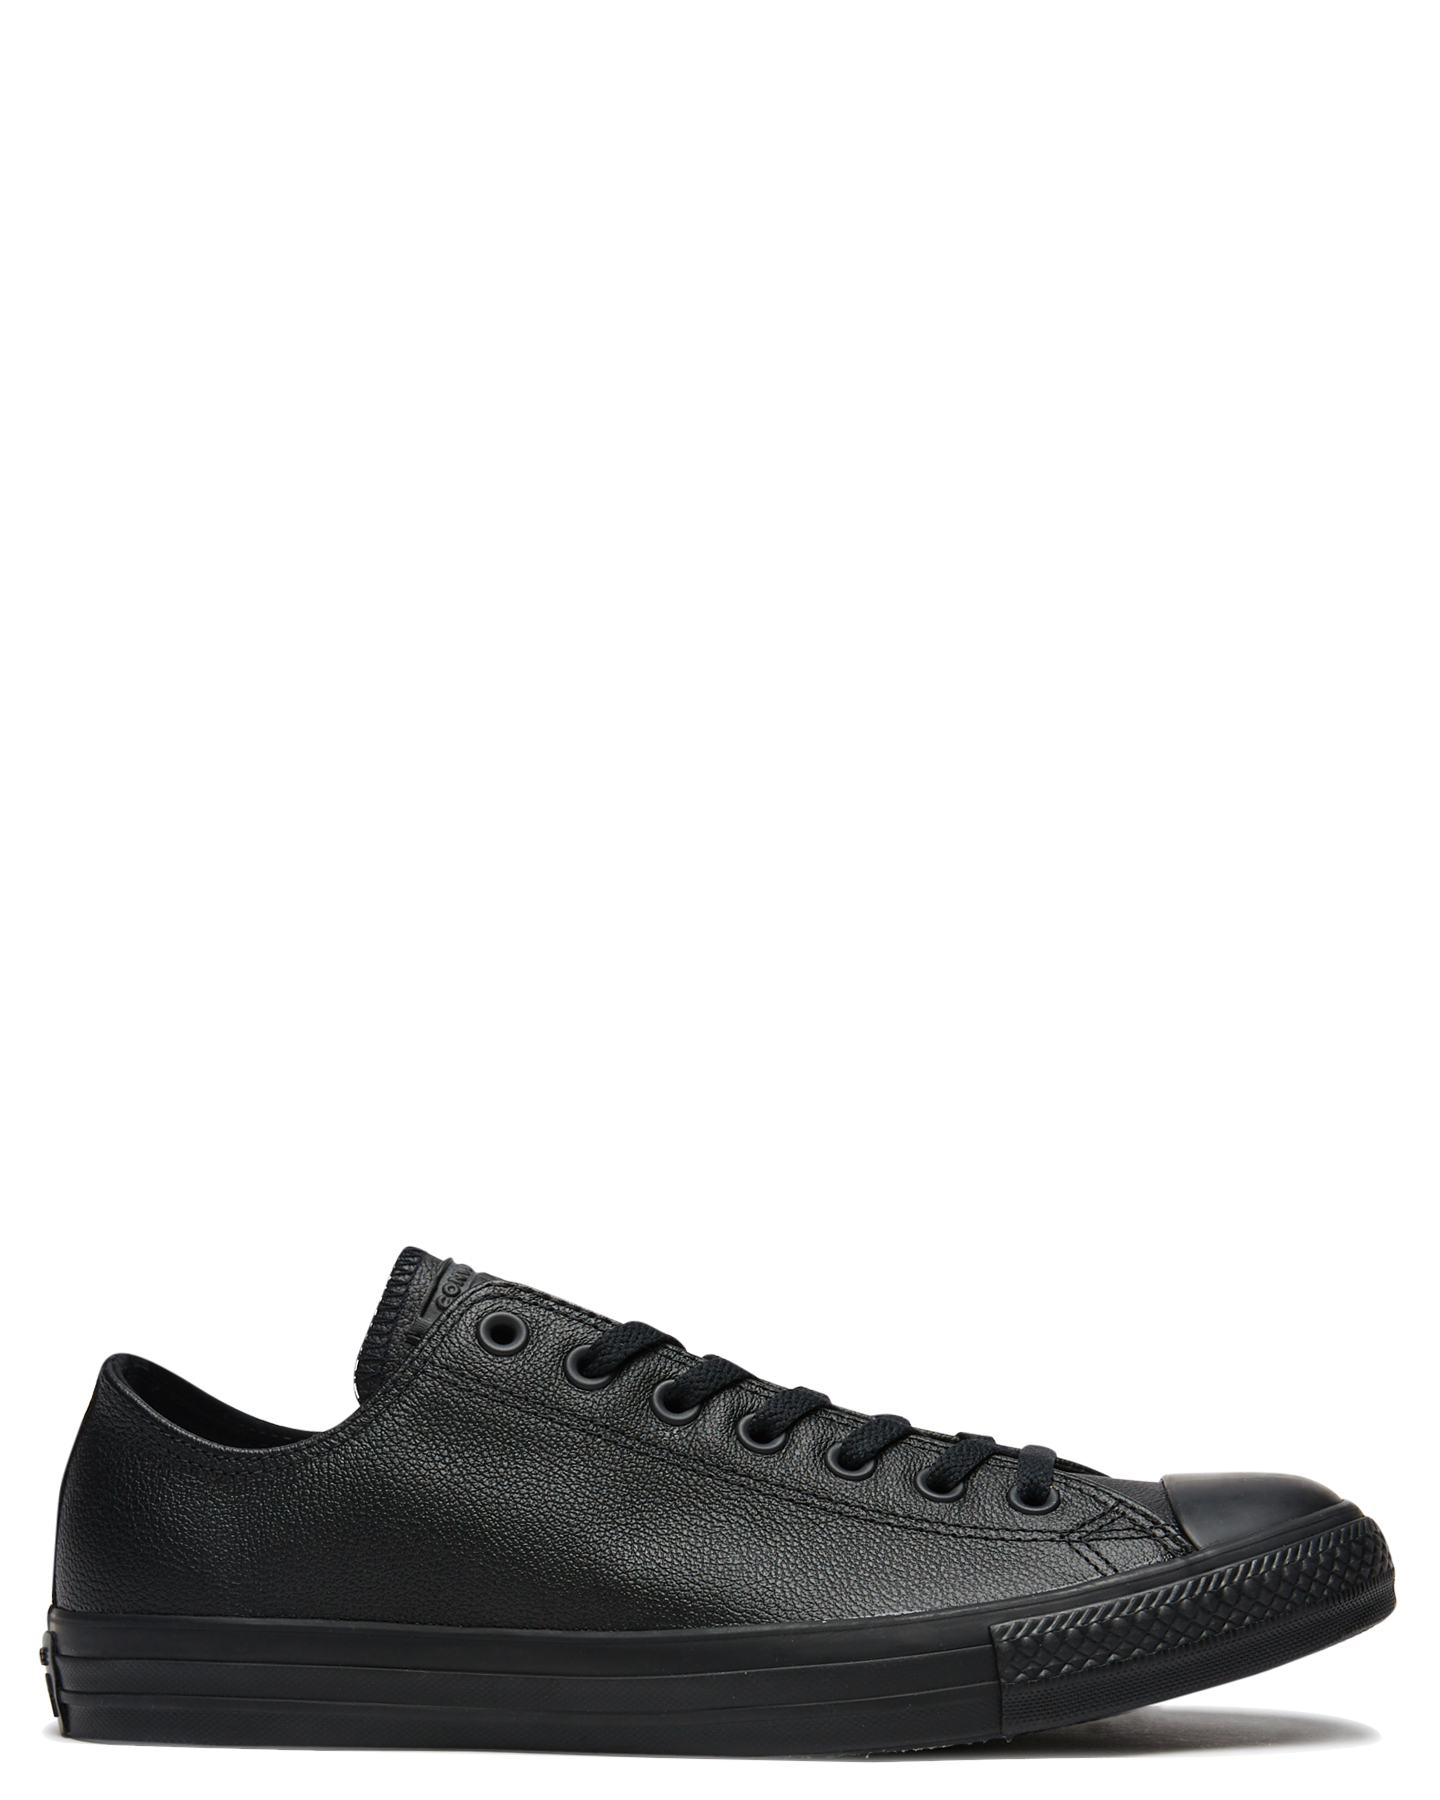 converse leather all black